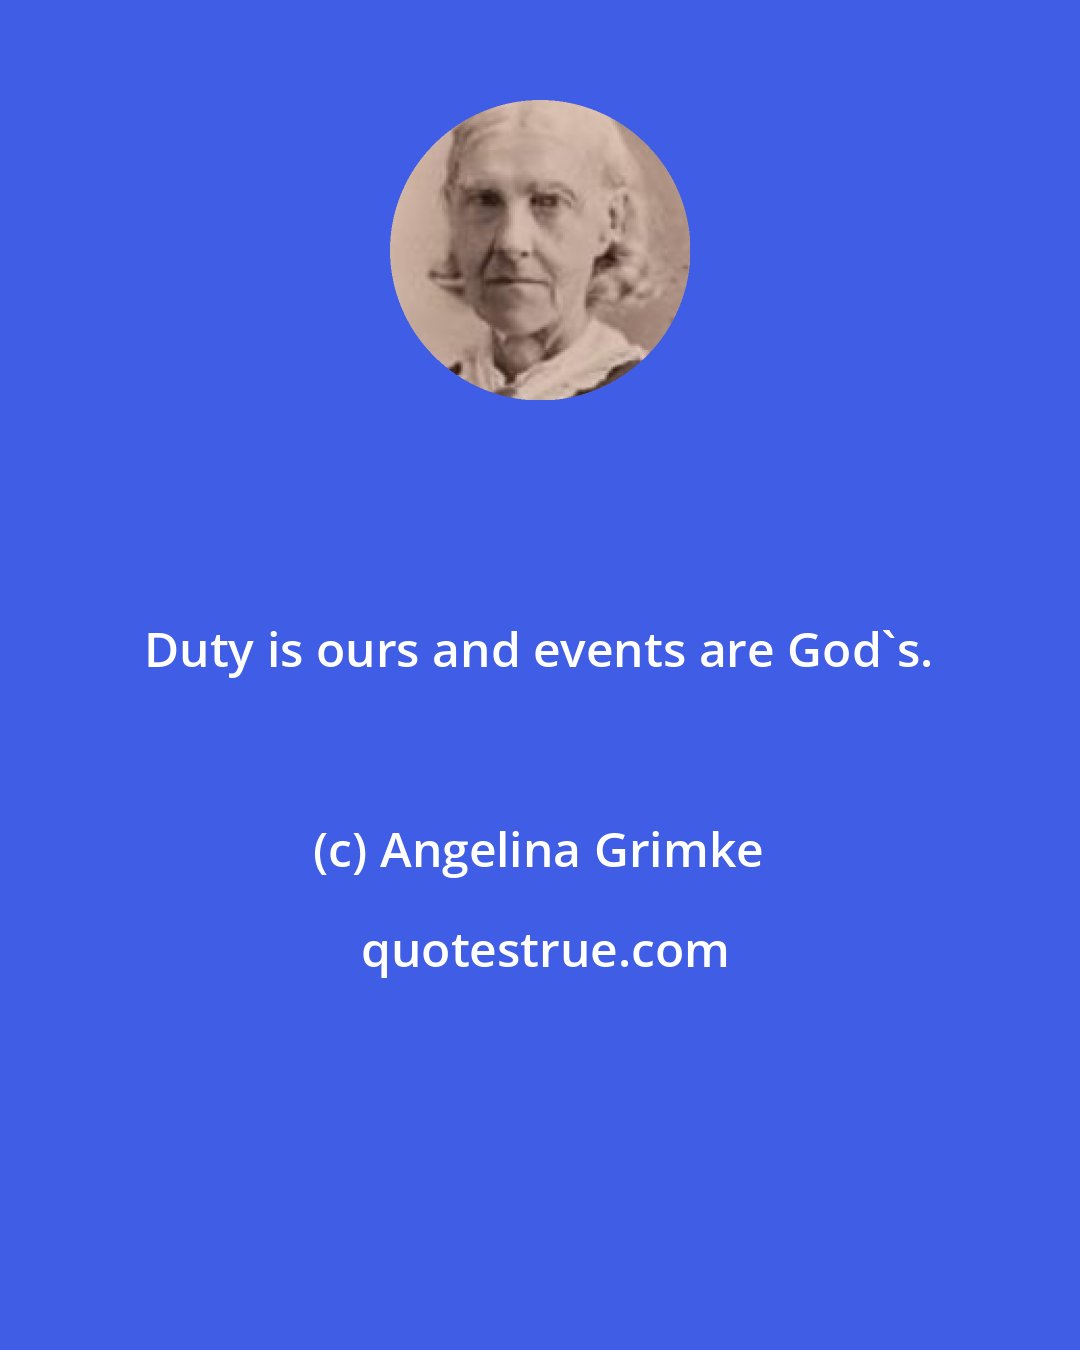 Angelina Grimke: Duty is ours and events are God's.